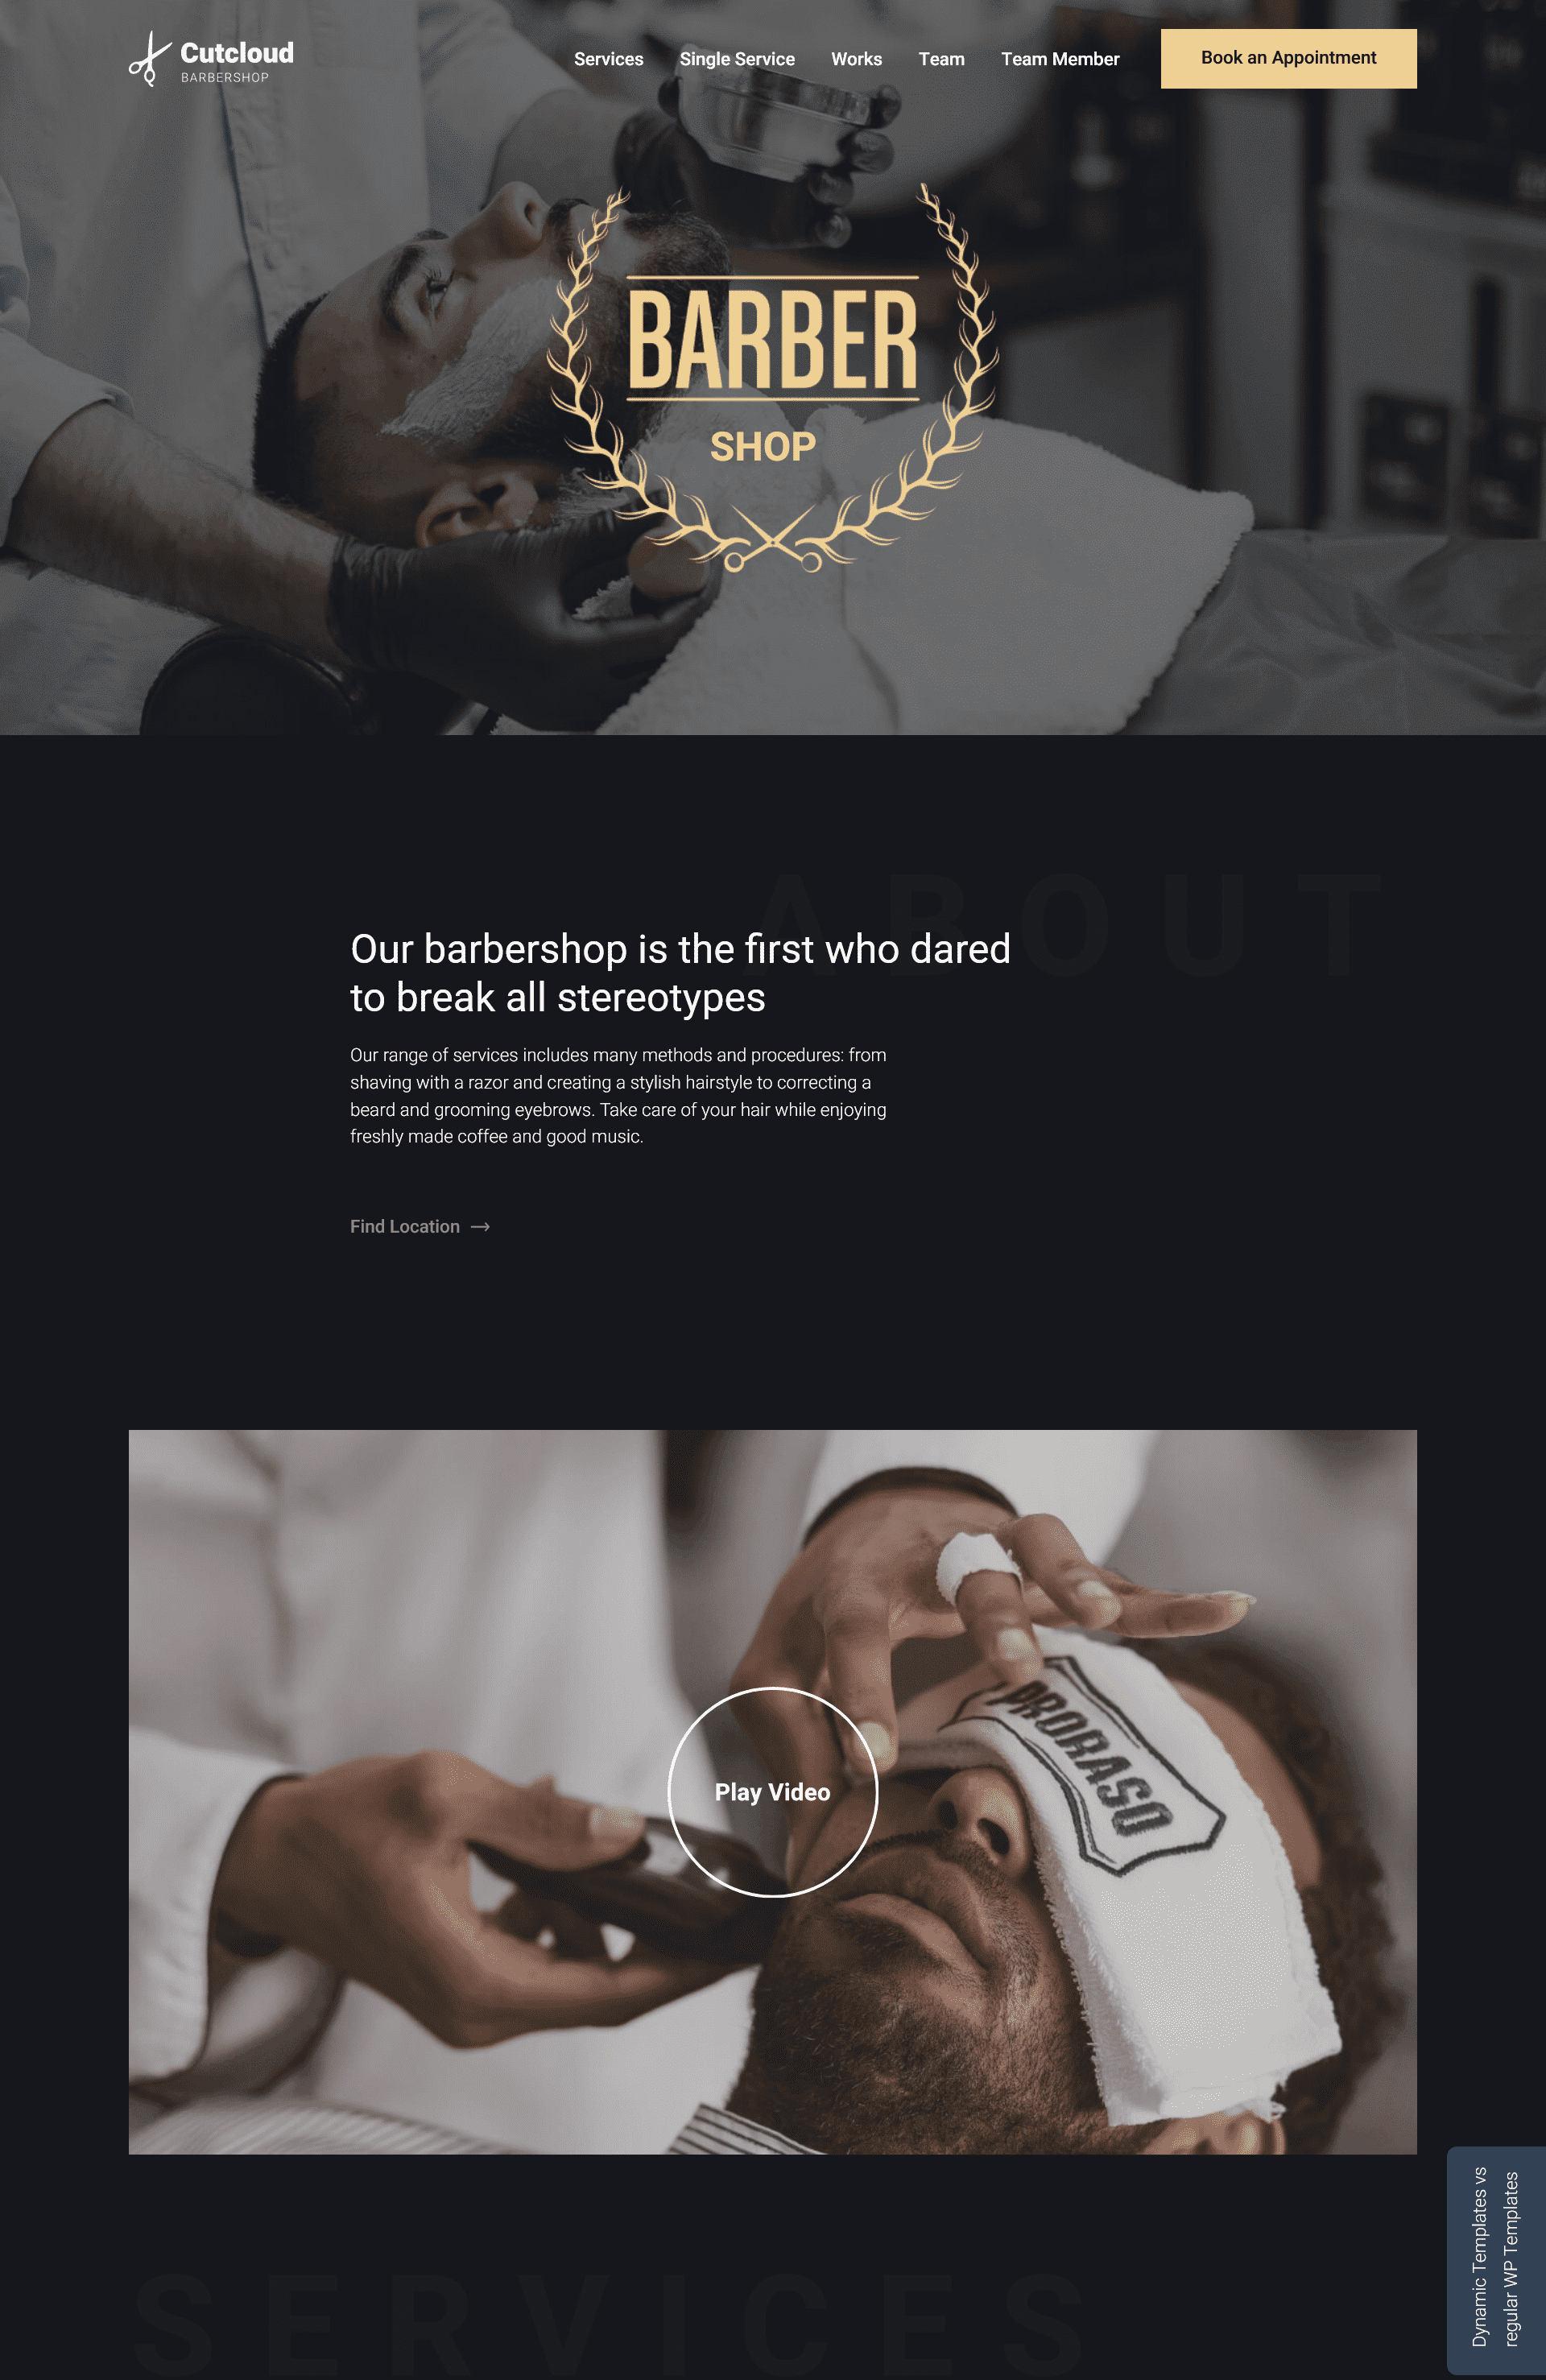 Barbershop-Appointment-Website-1.png